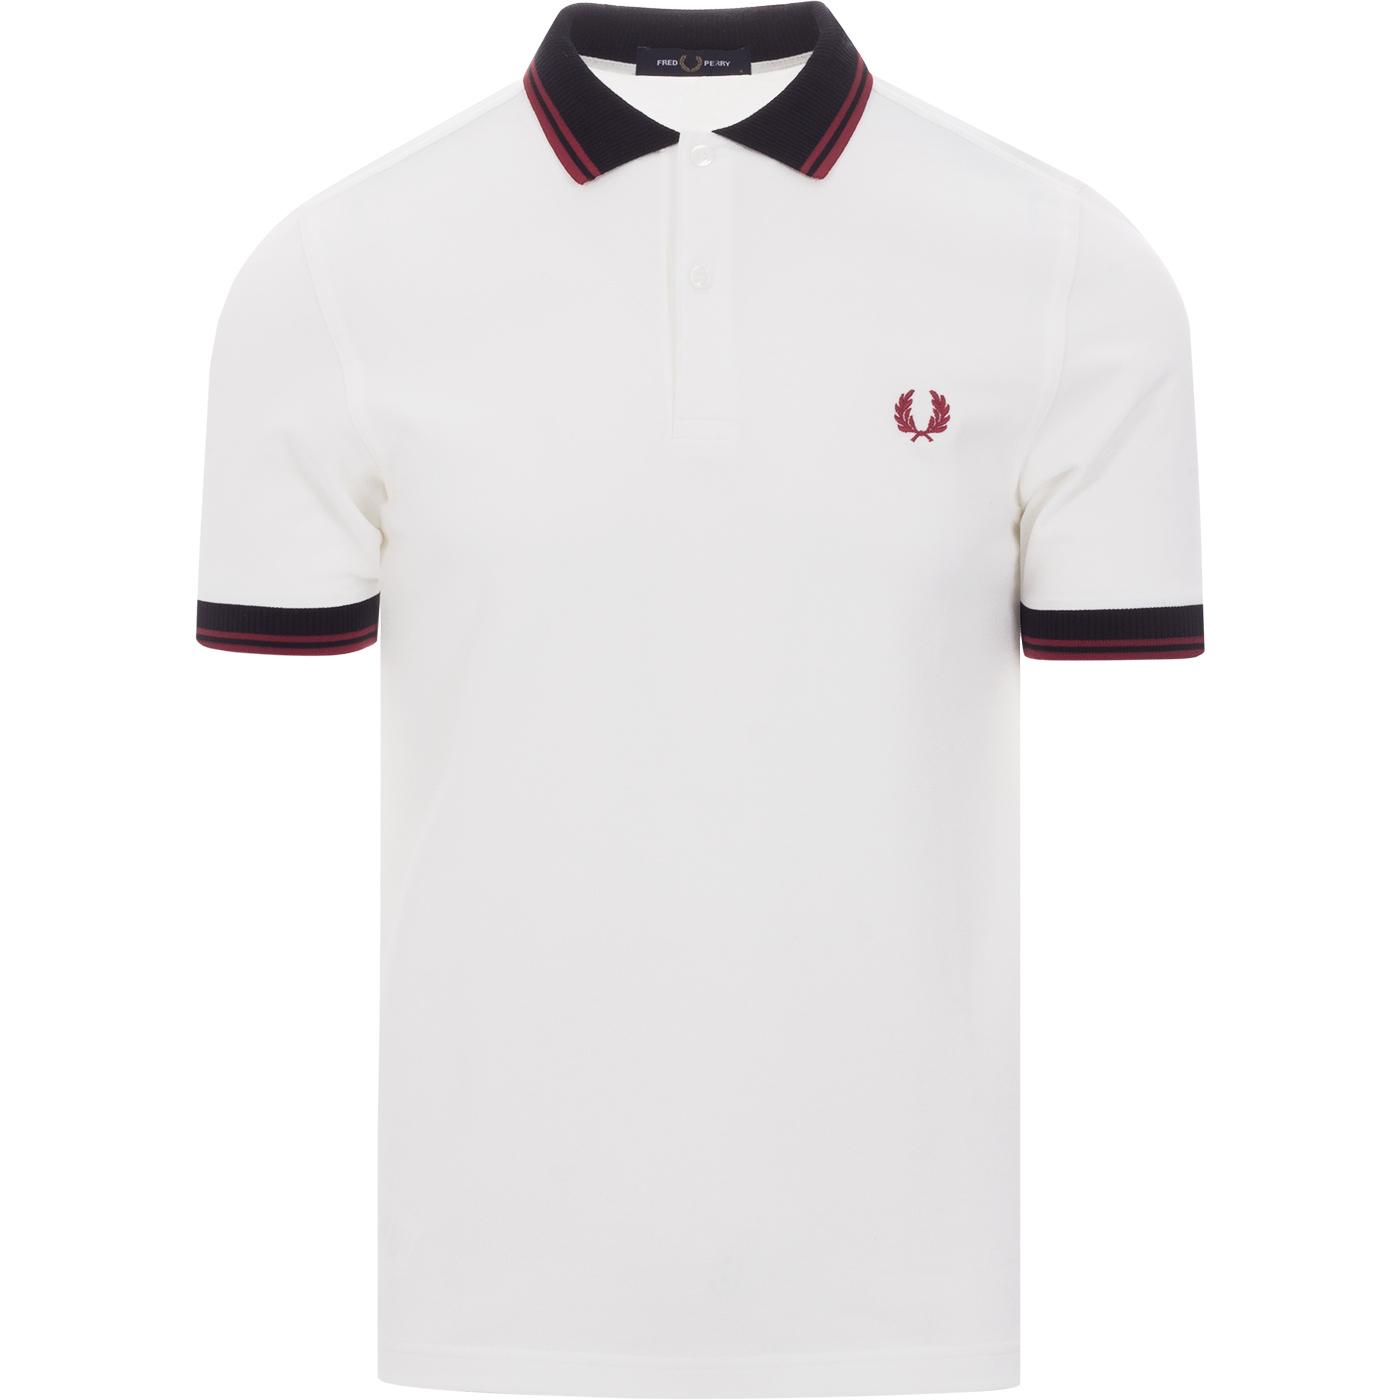 FRED PERRY Contrast Trim Tipped Mod Pique Polo SW